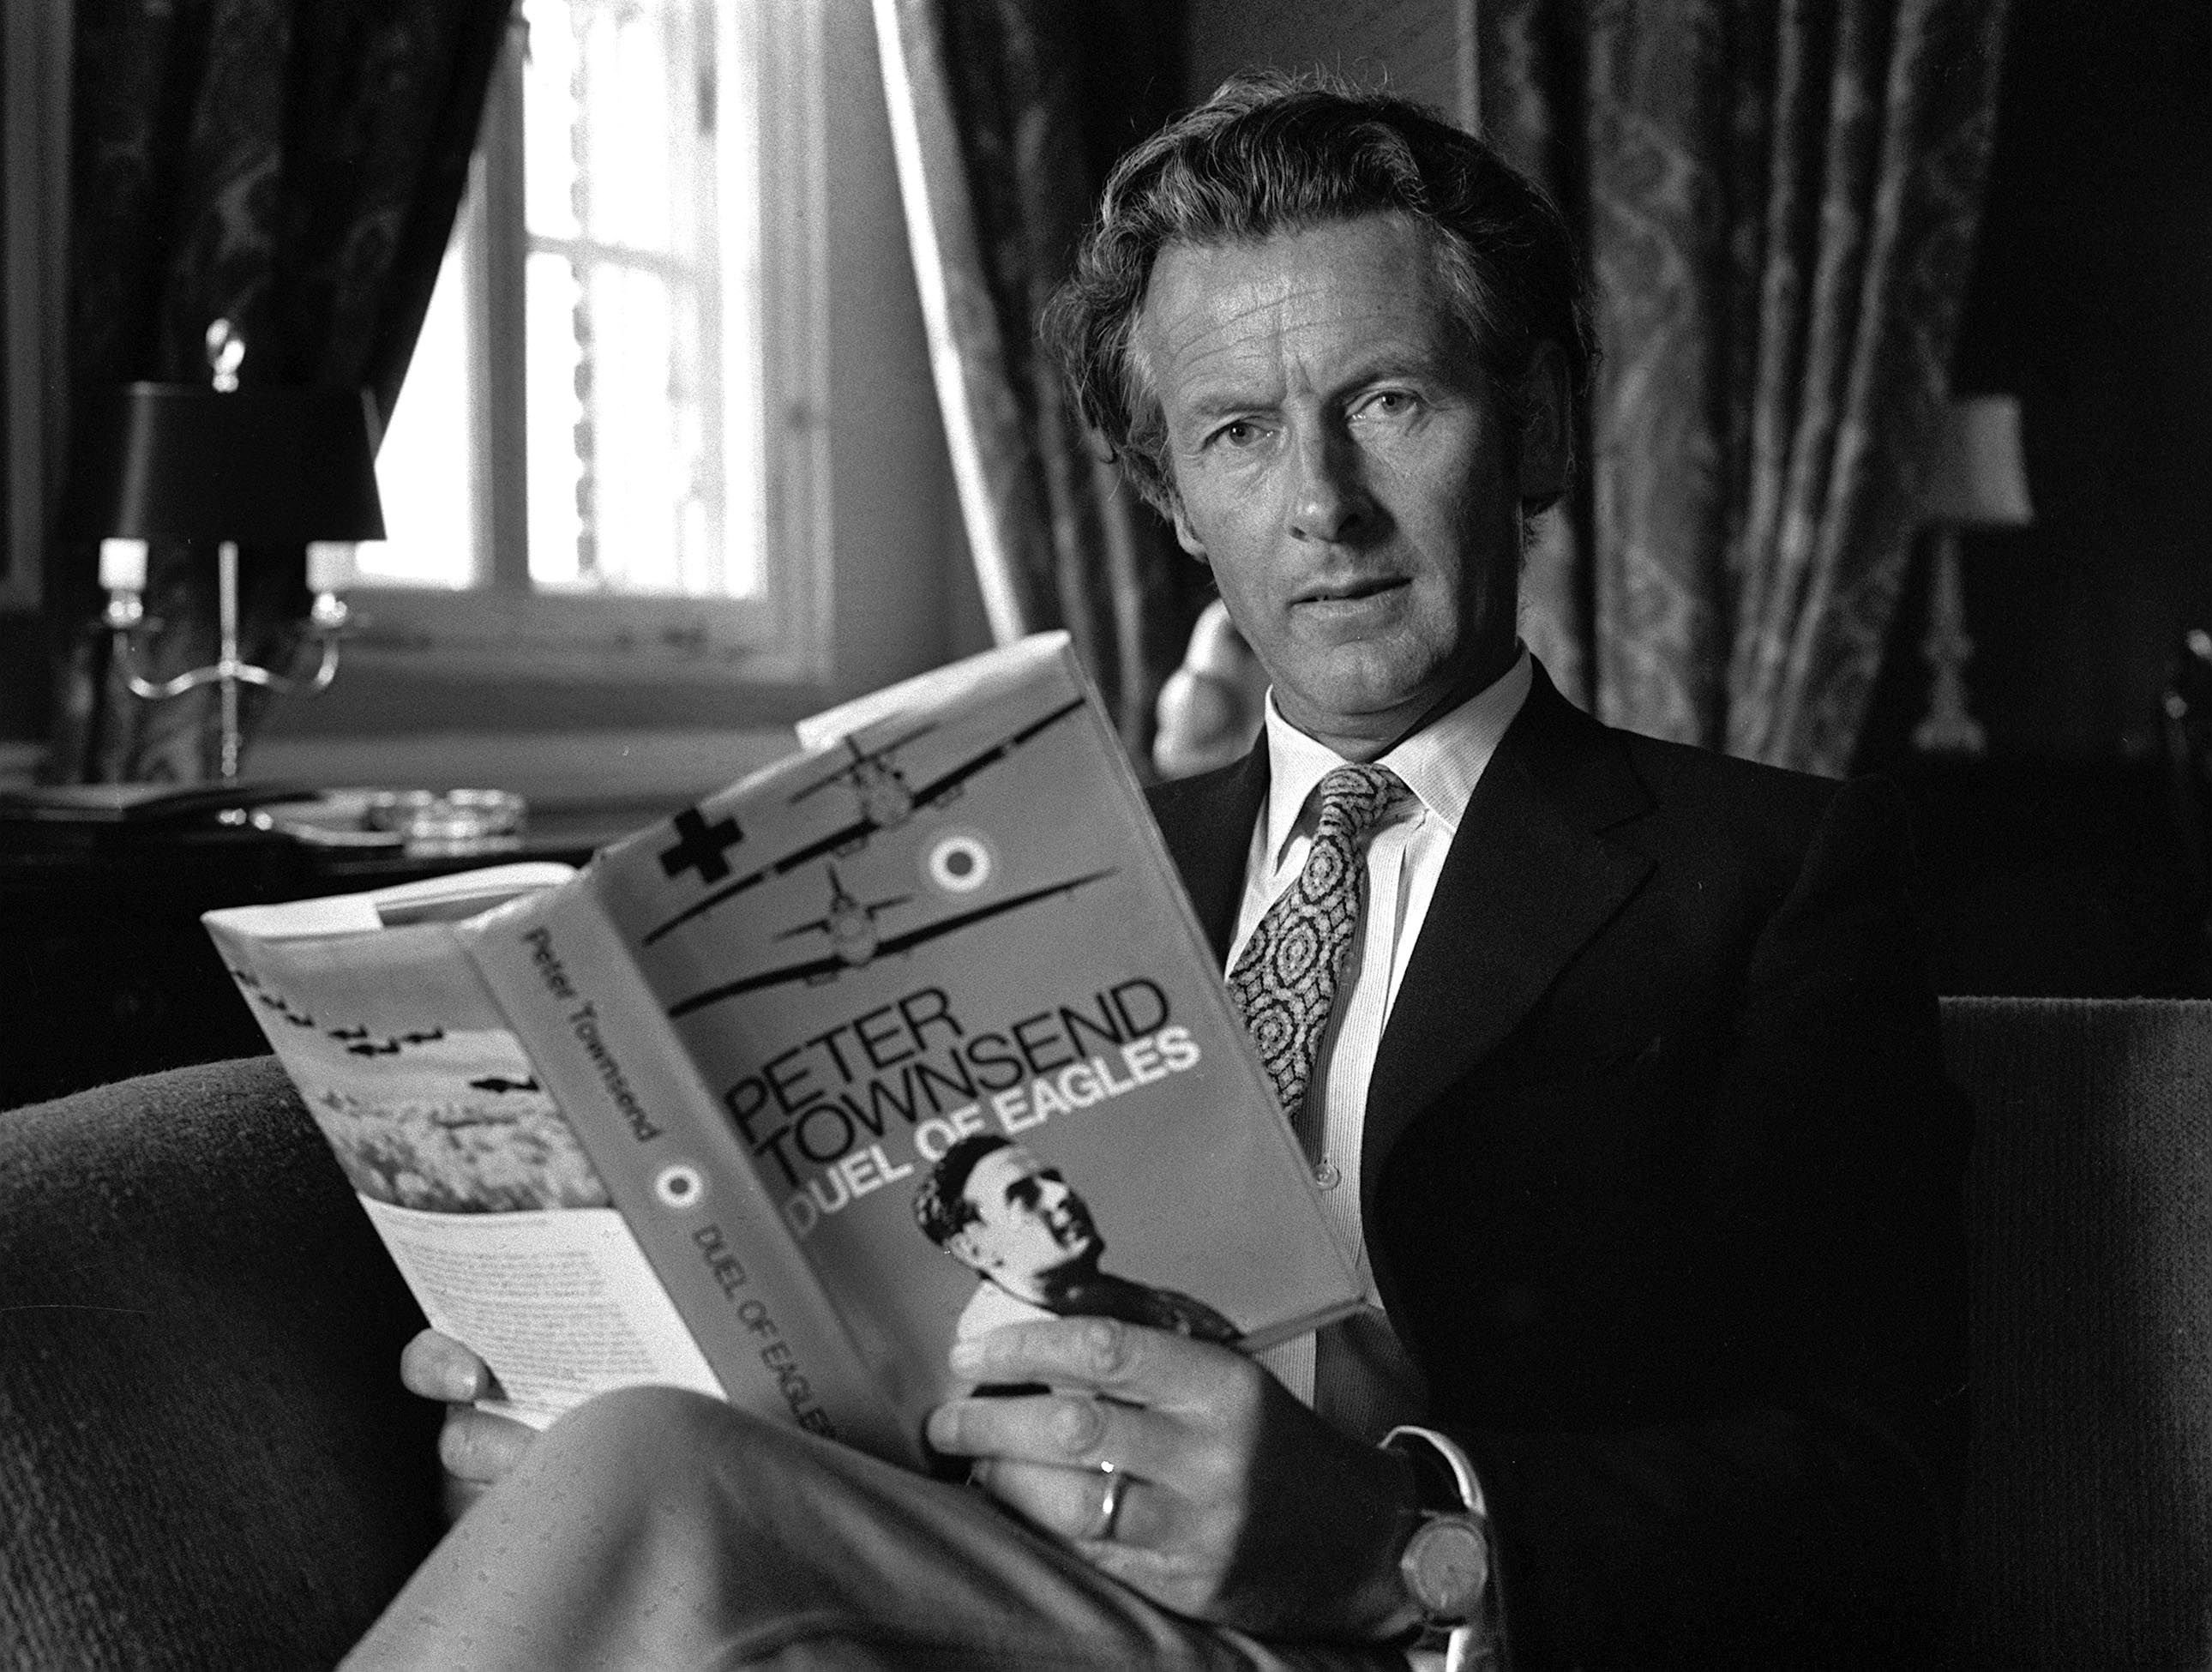 Group Captain Peter Townsend at the London launch of his book "Duel of Eagles," September 3, 1970. | Source: Getty Images 